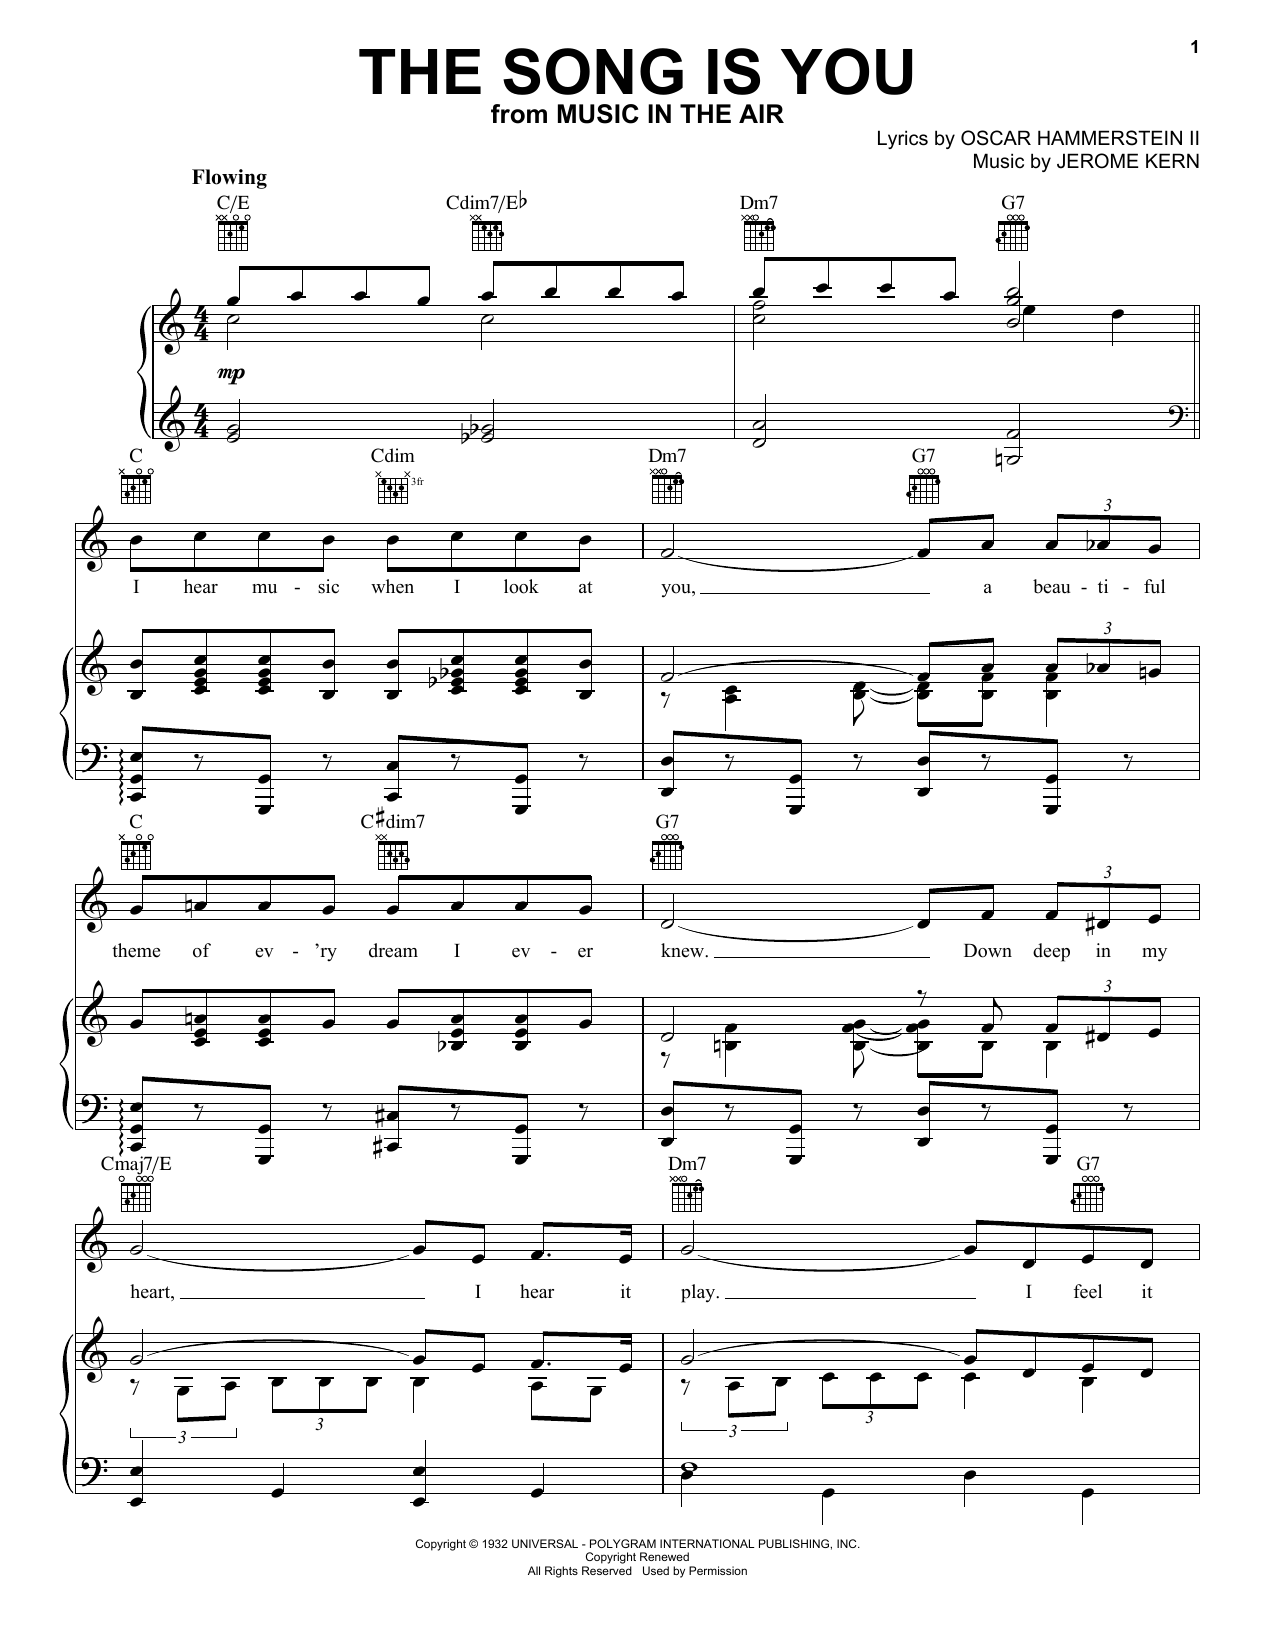 Frank Sinatra The Song Is You sheet music notes and chords. Download Printable PDF.